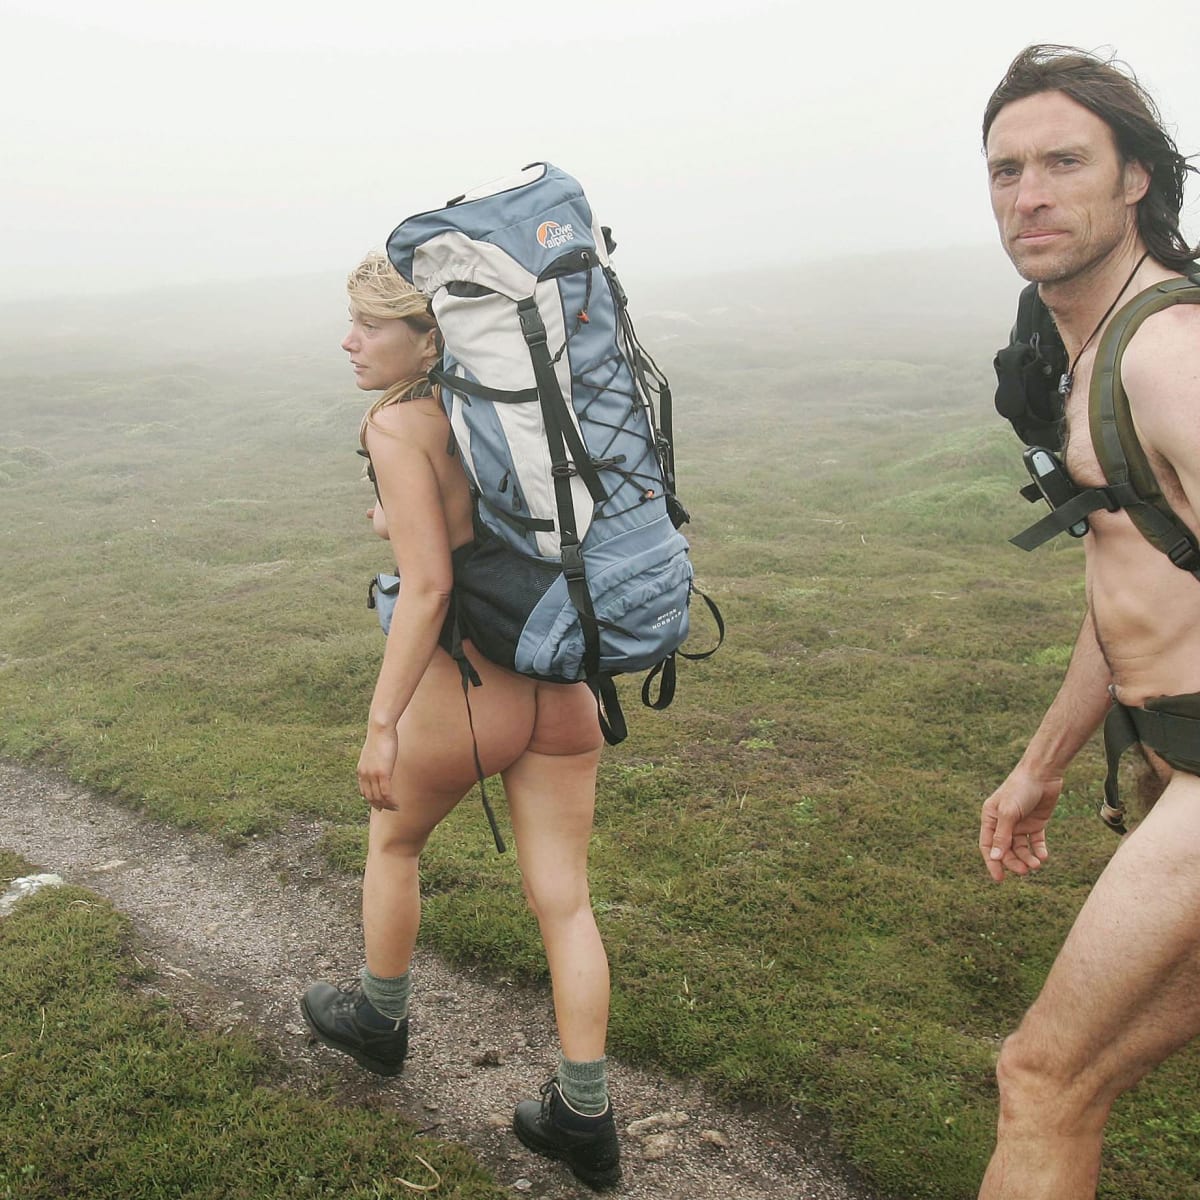 Happy Nude Hiking Day! Heres How to (Legally) Make the Most of It photo